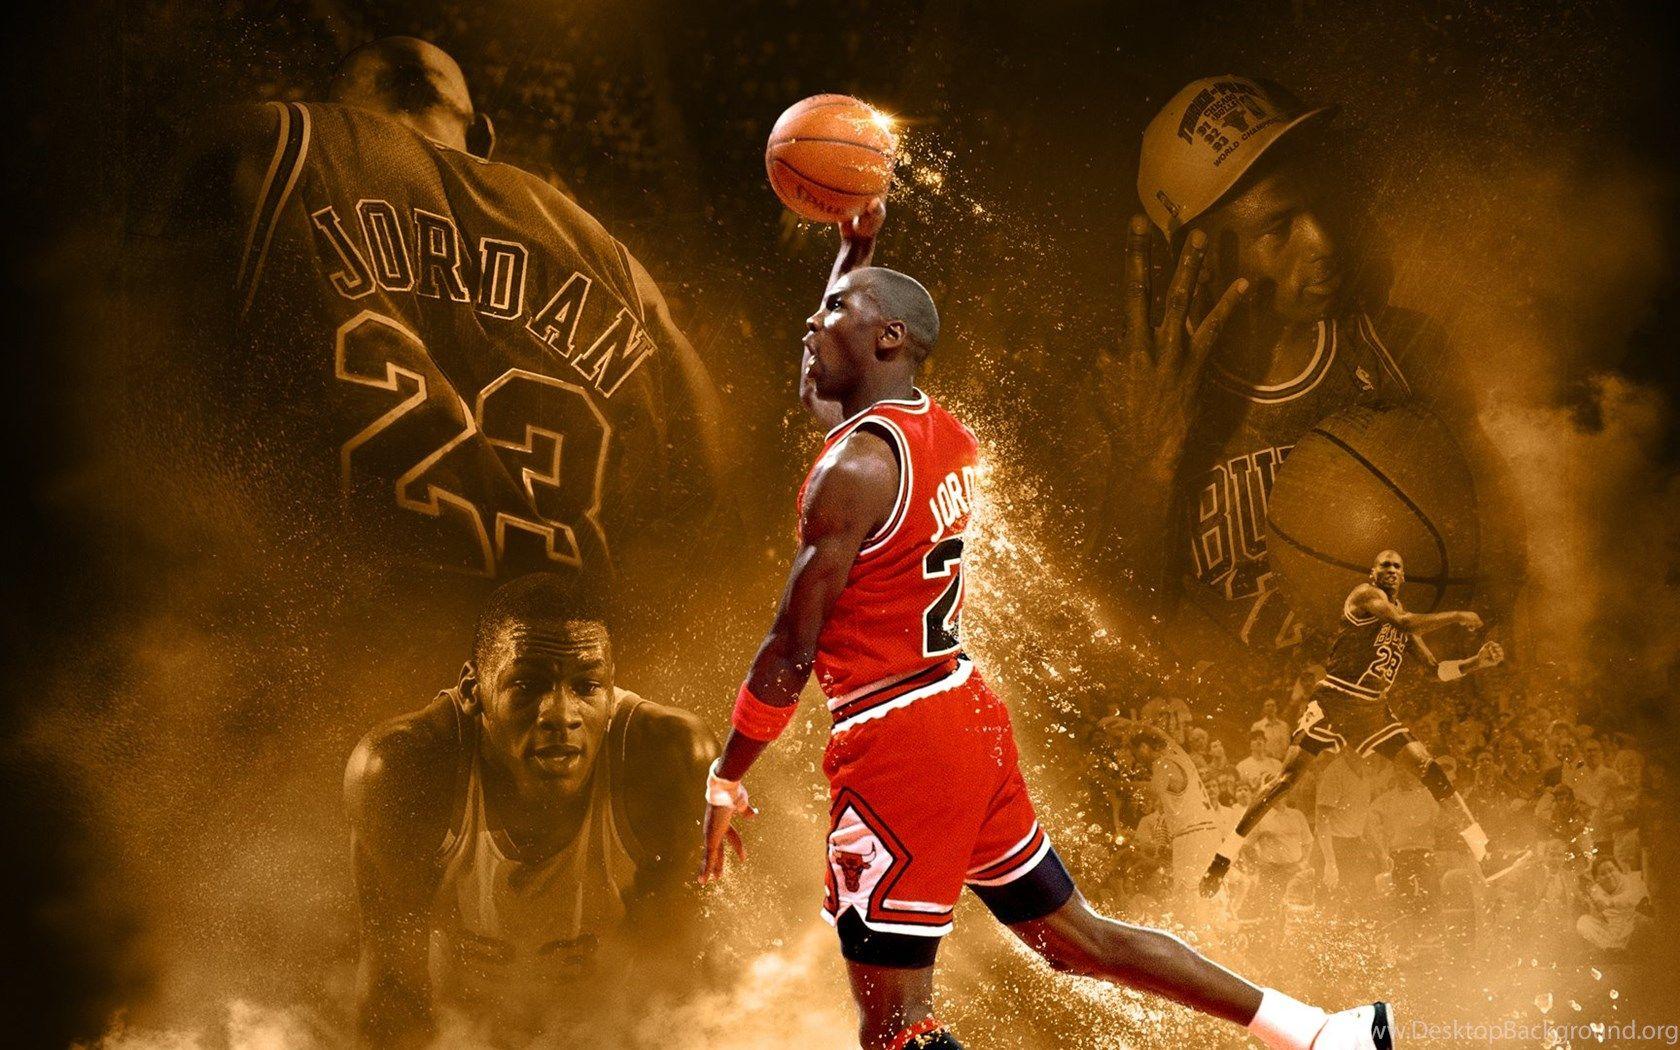 Download Free HD Cool Basketball Wallpapers For iPhone